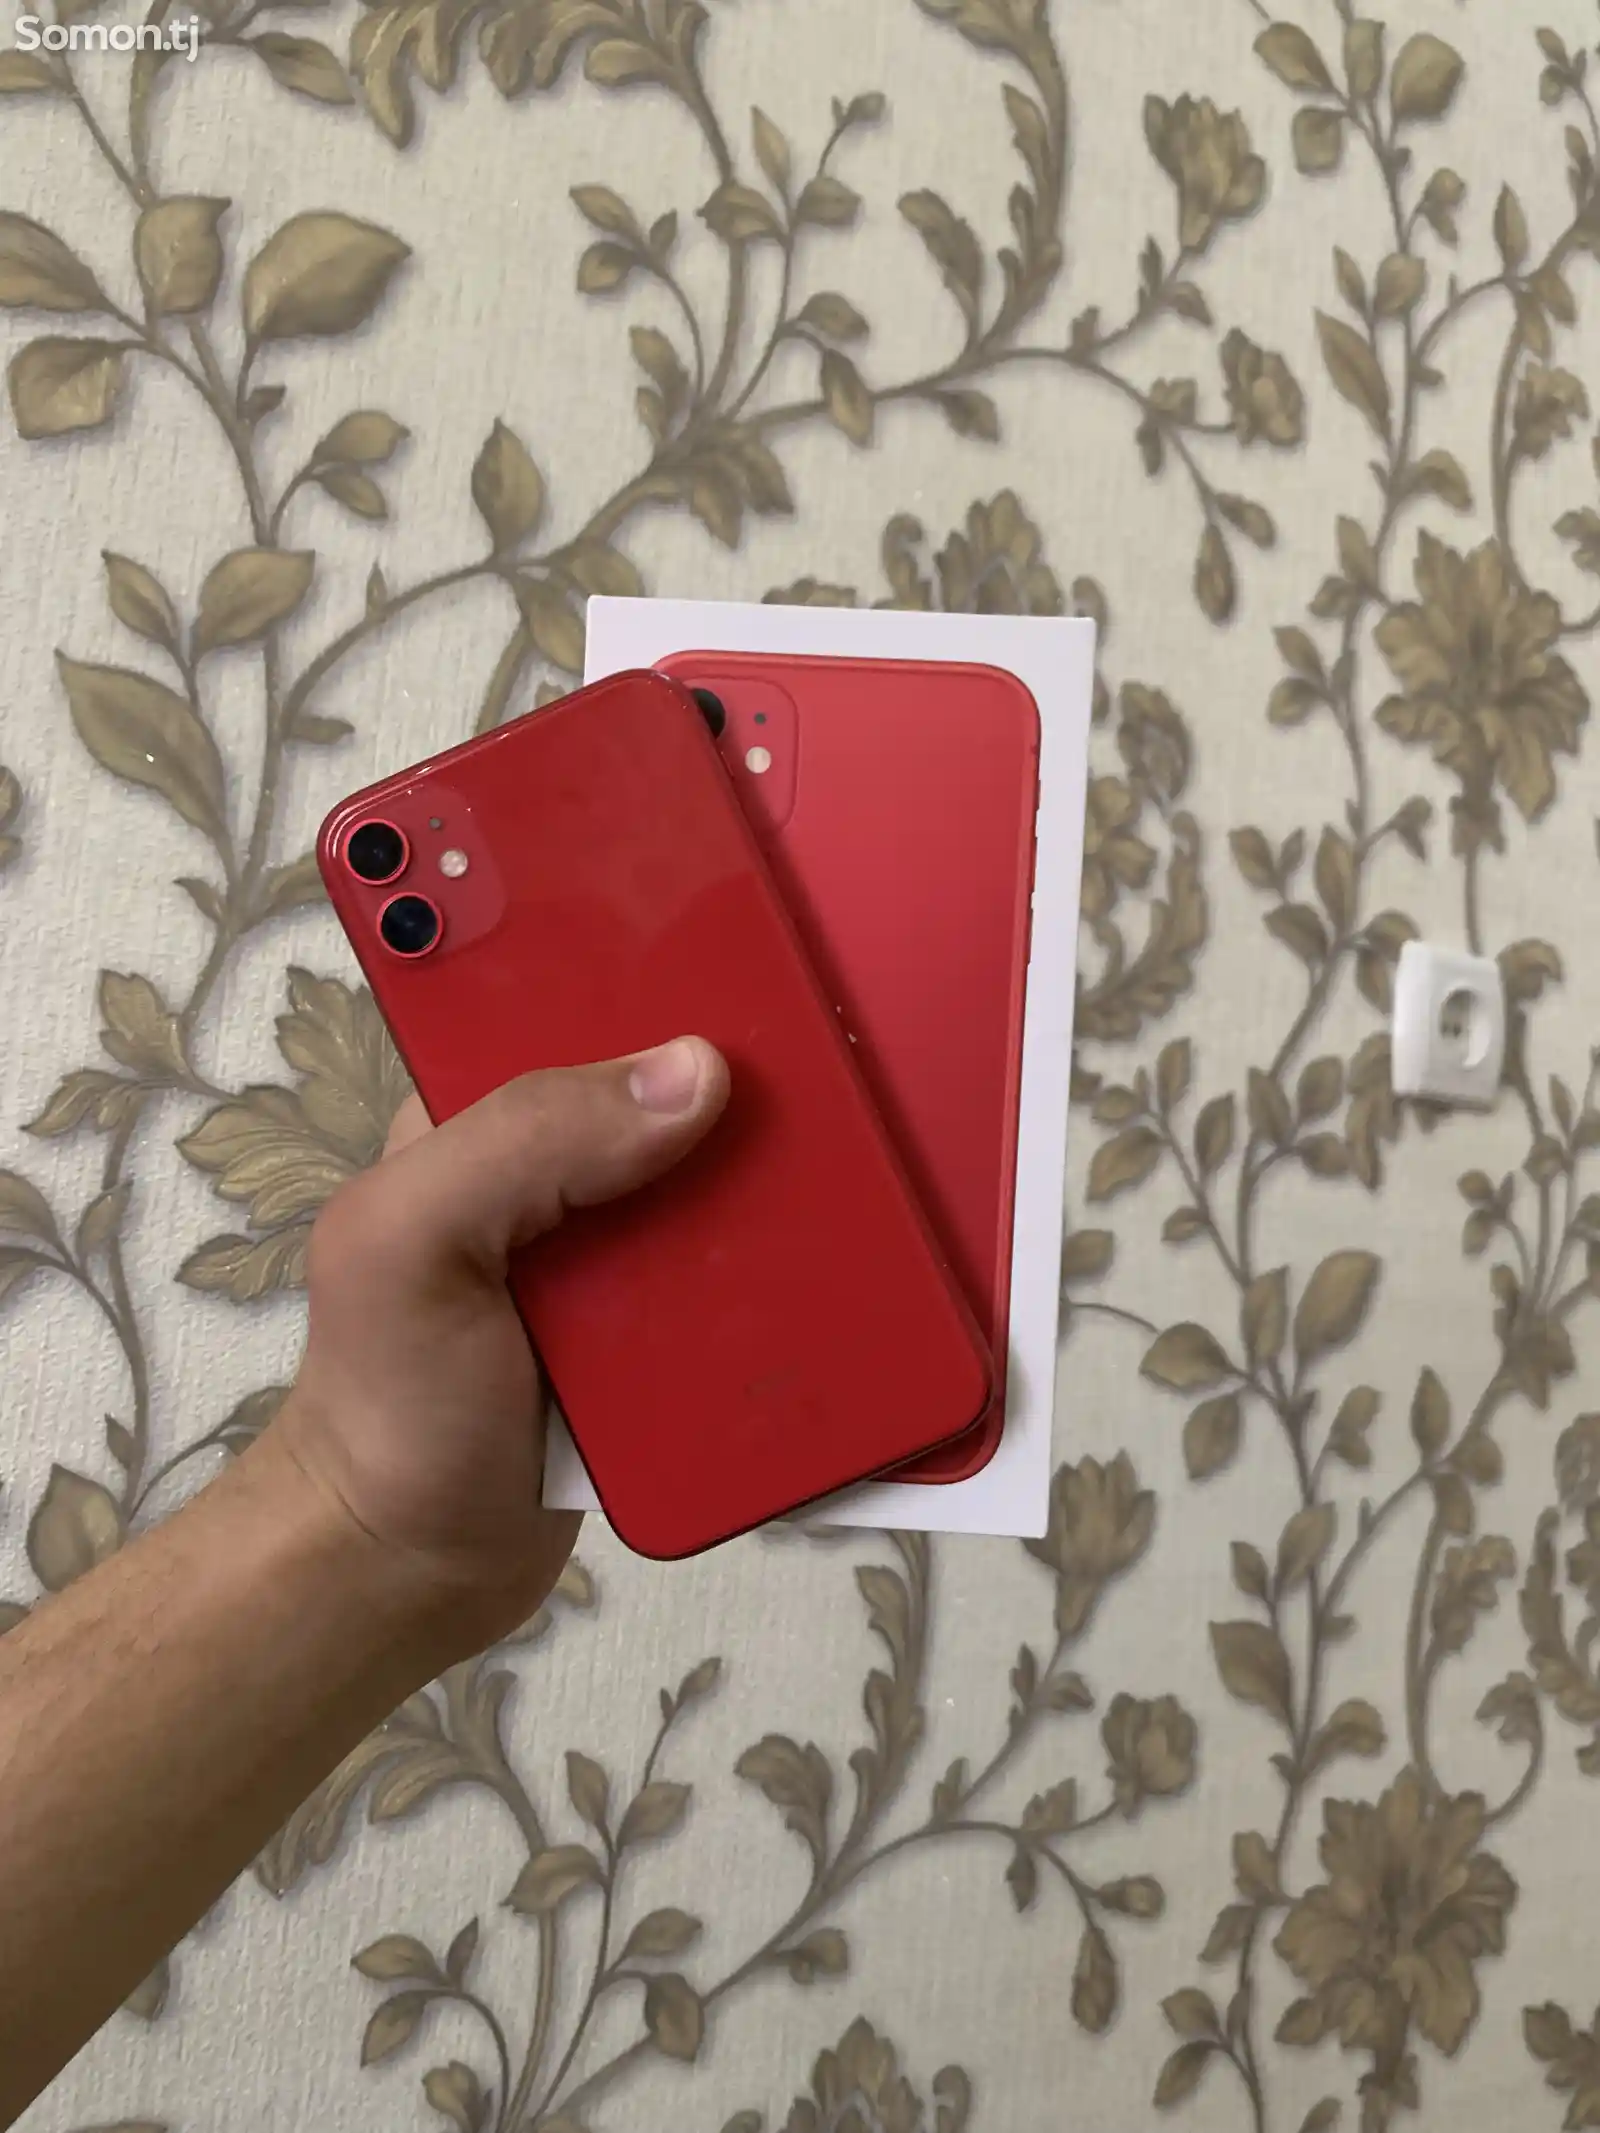 Apple iPhone 11, 64 gb, Product Red